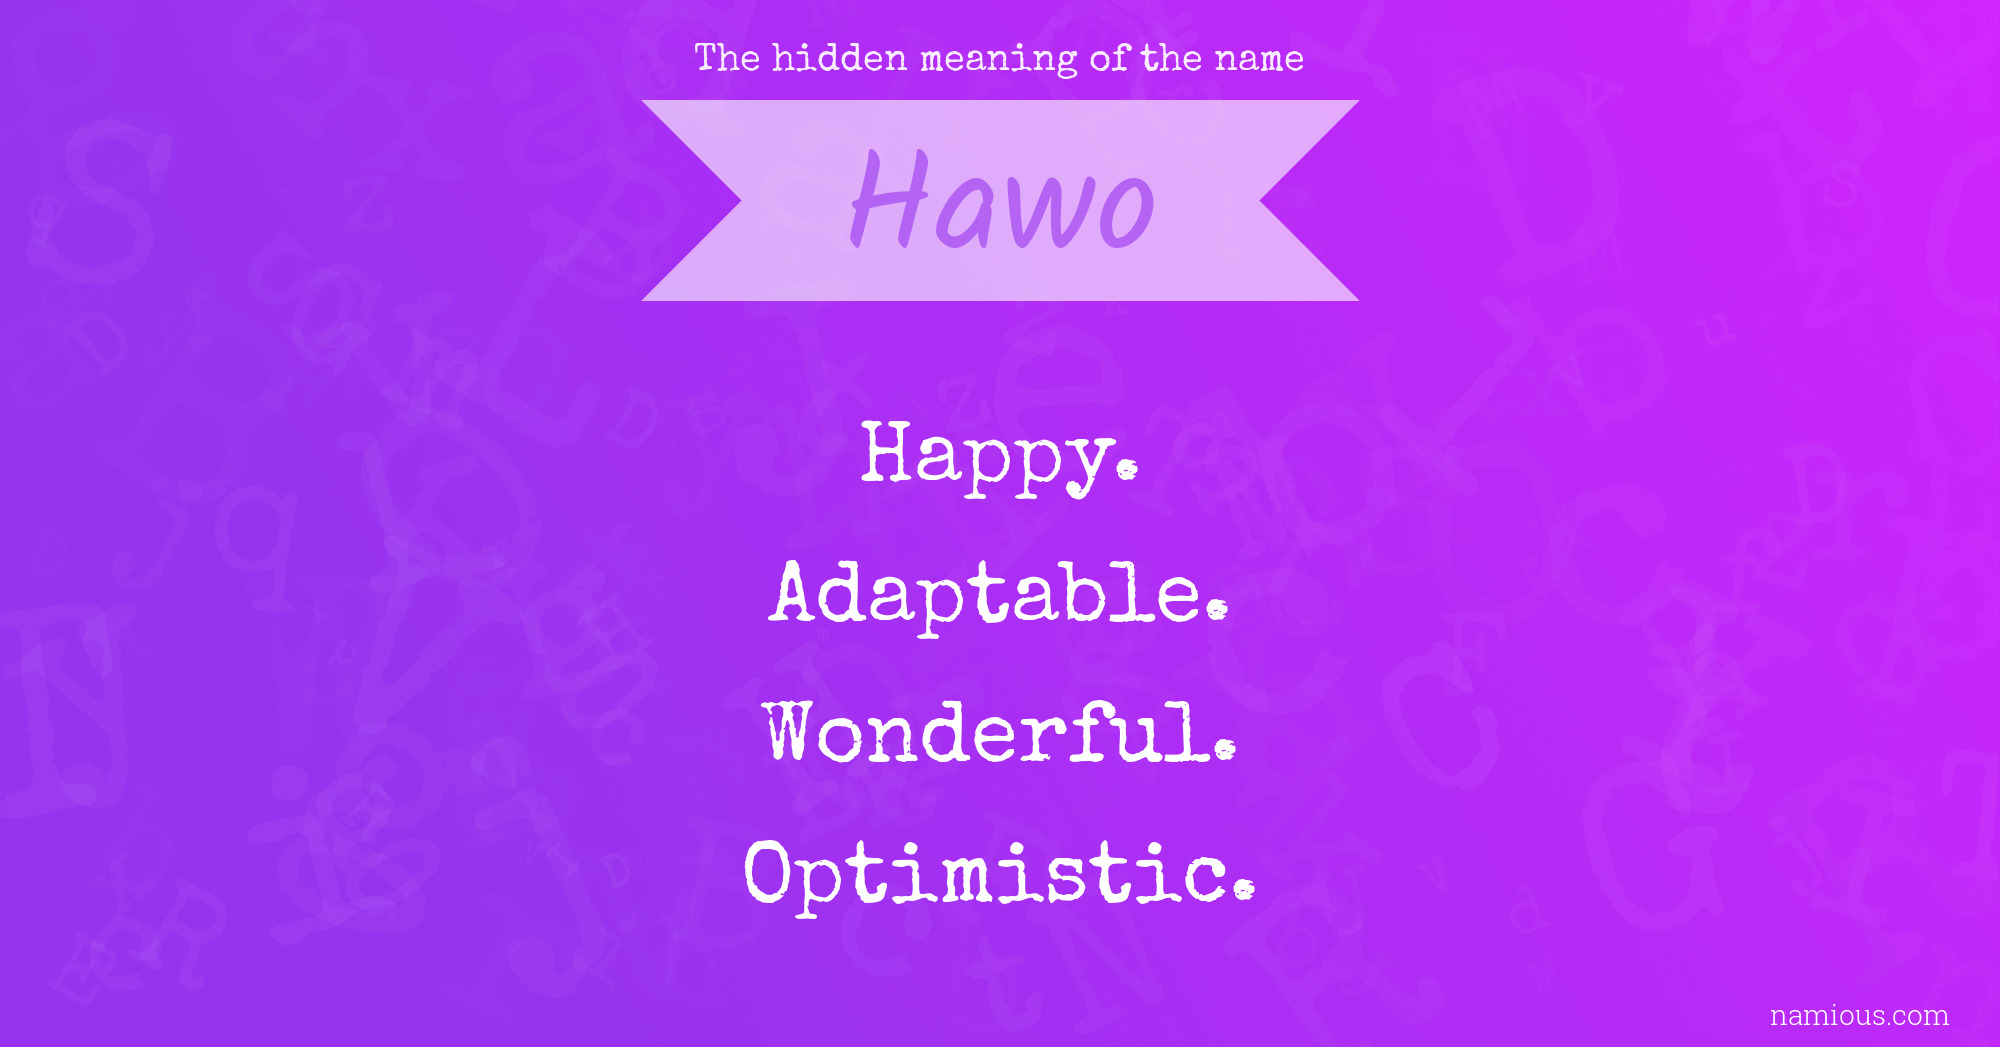 The hidden meaning of the name Hawo